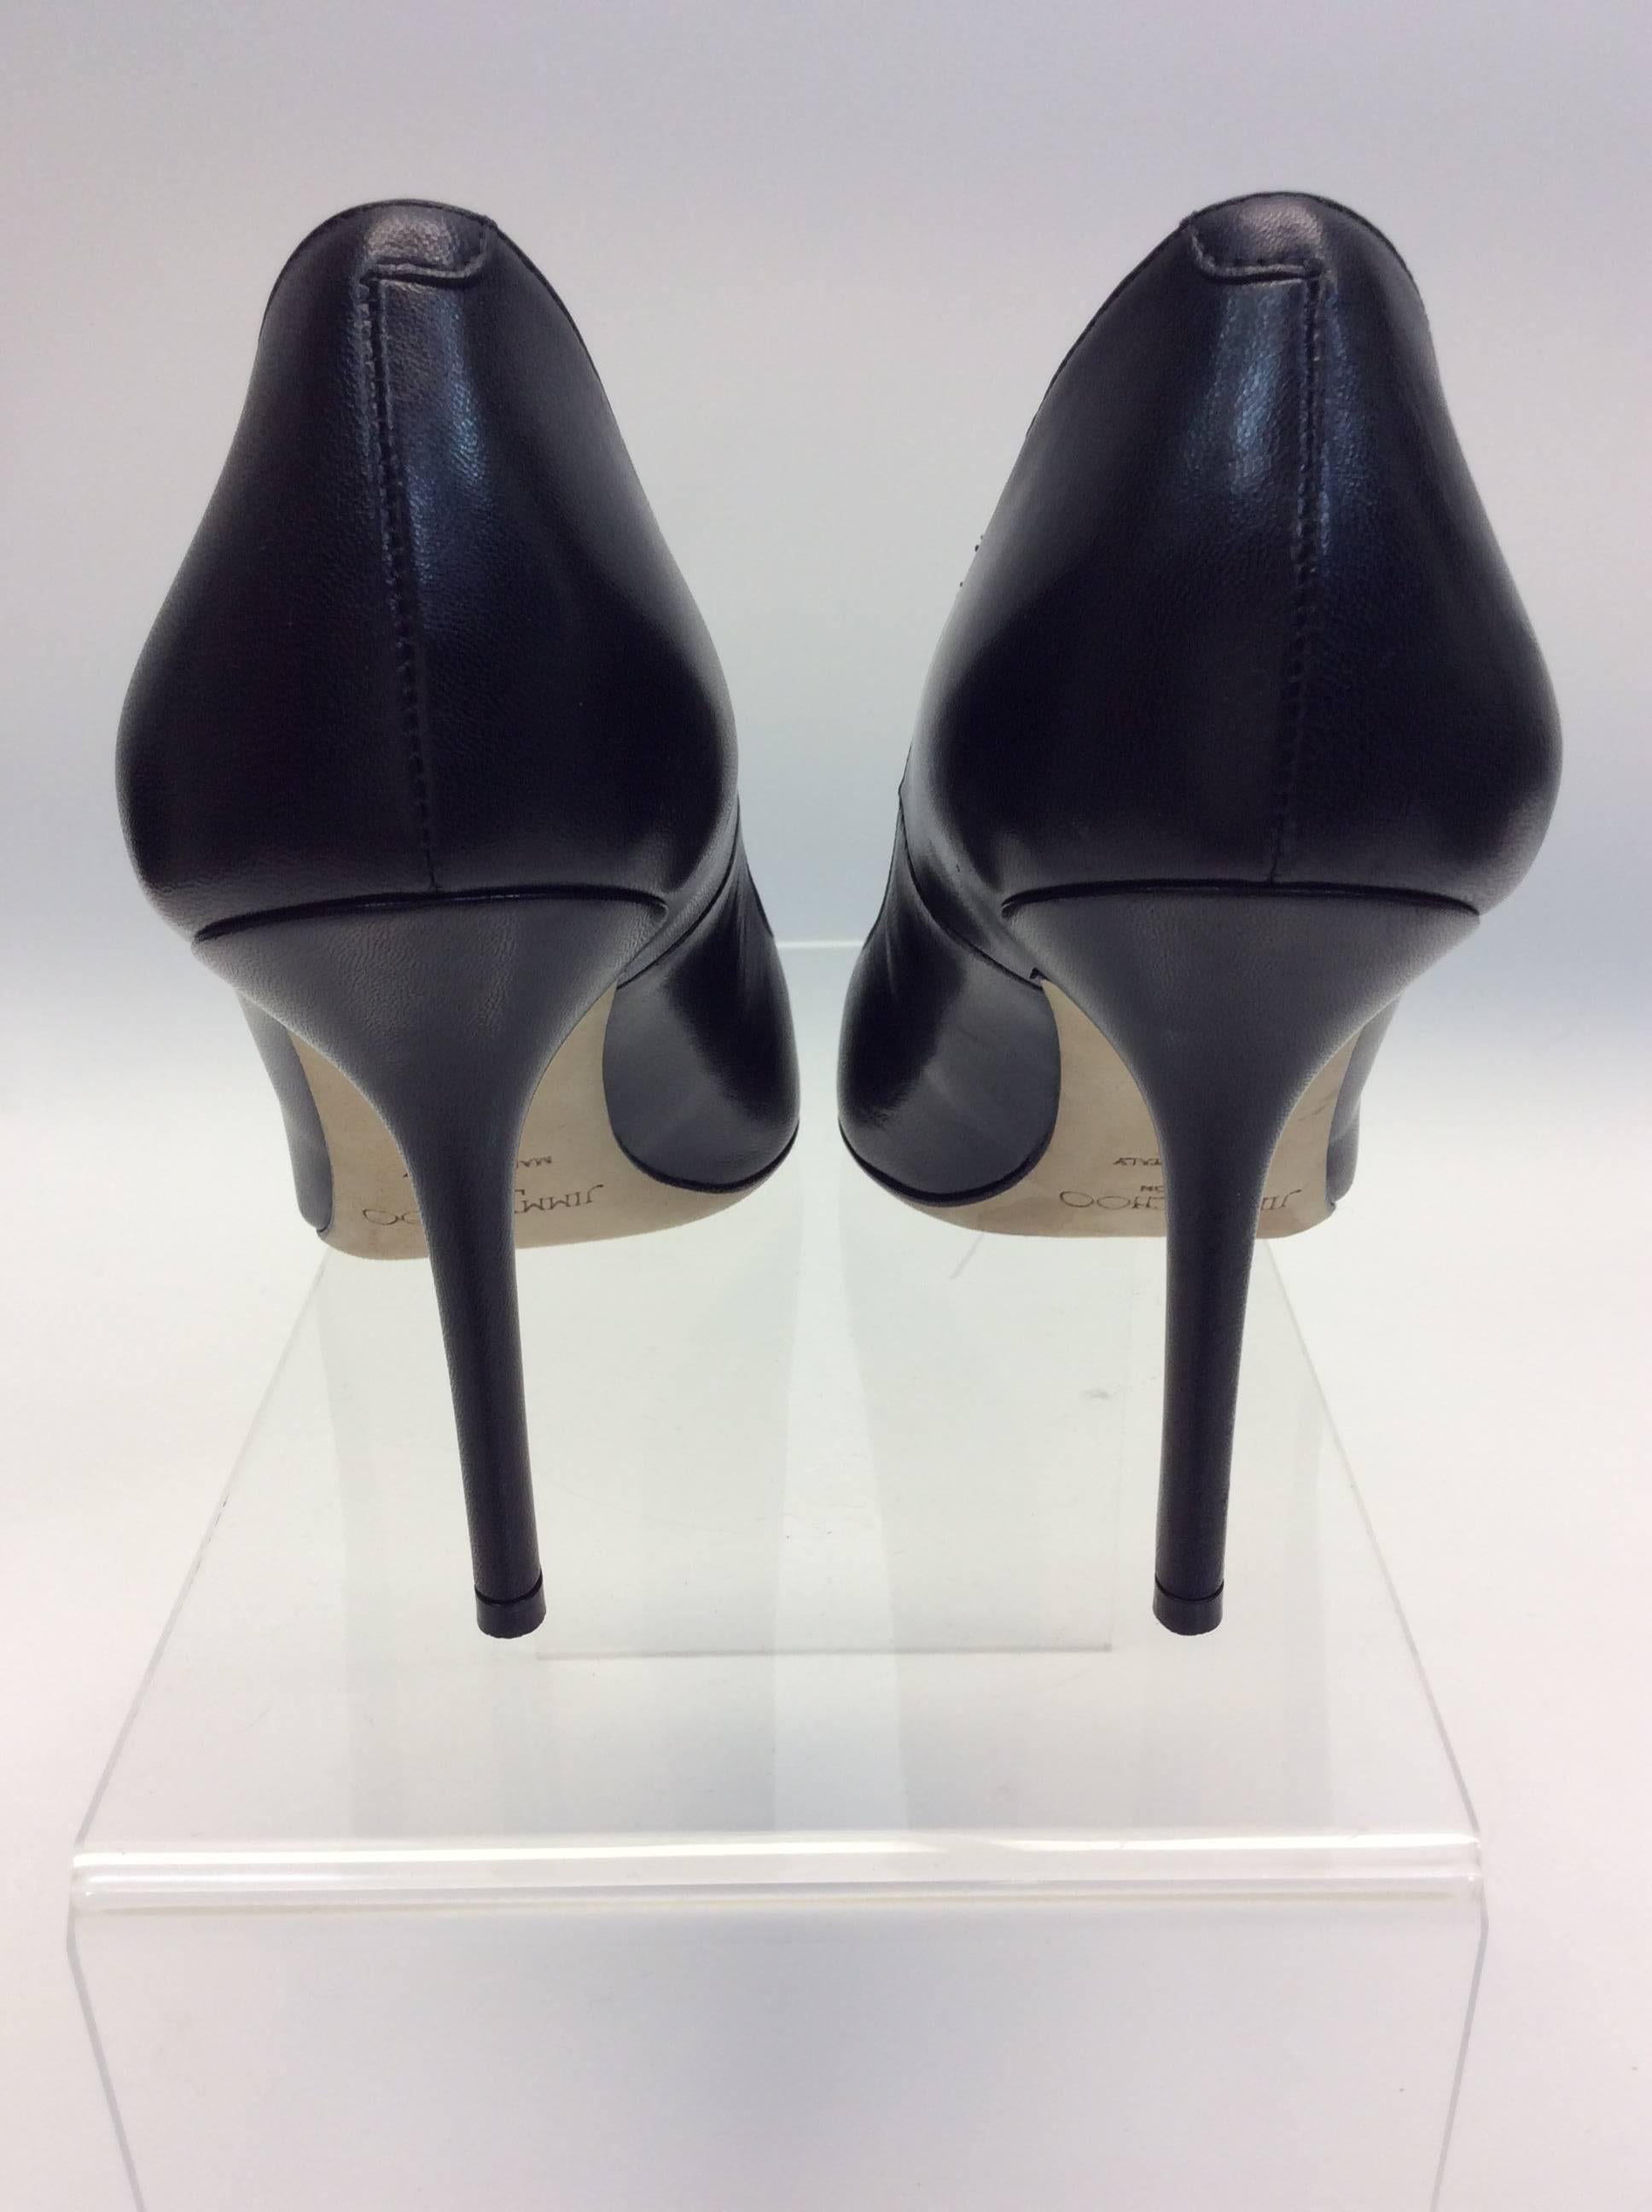 Jimmy Choo Black Leather Heels In Excellent Condition For Sale In Narberth, PA